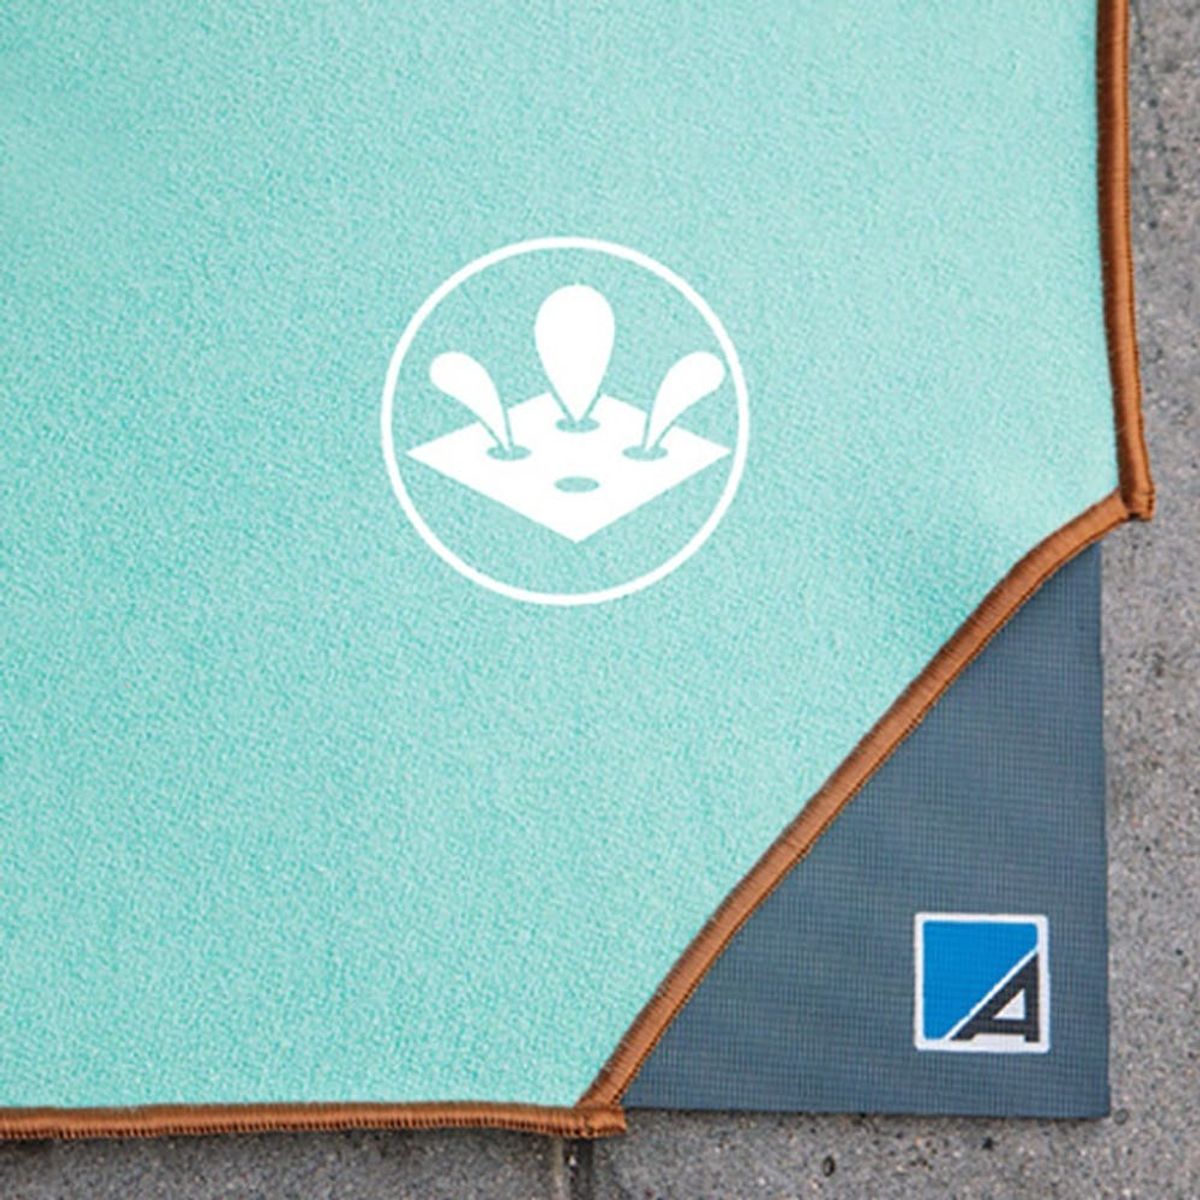 This Genius Towel Solves the Most Annoying Yoga Problem